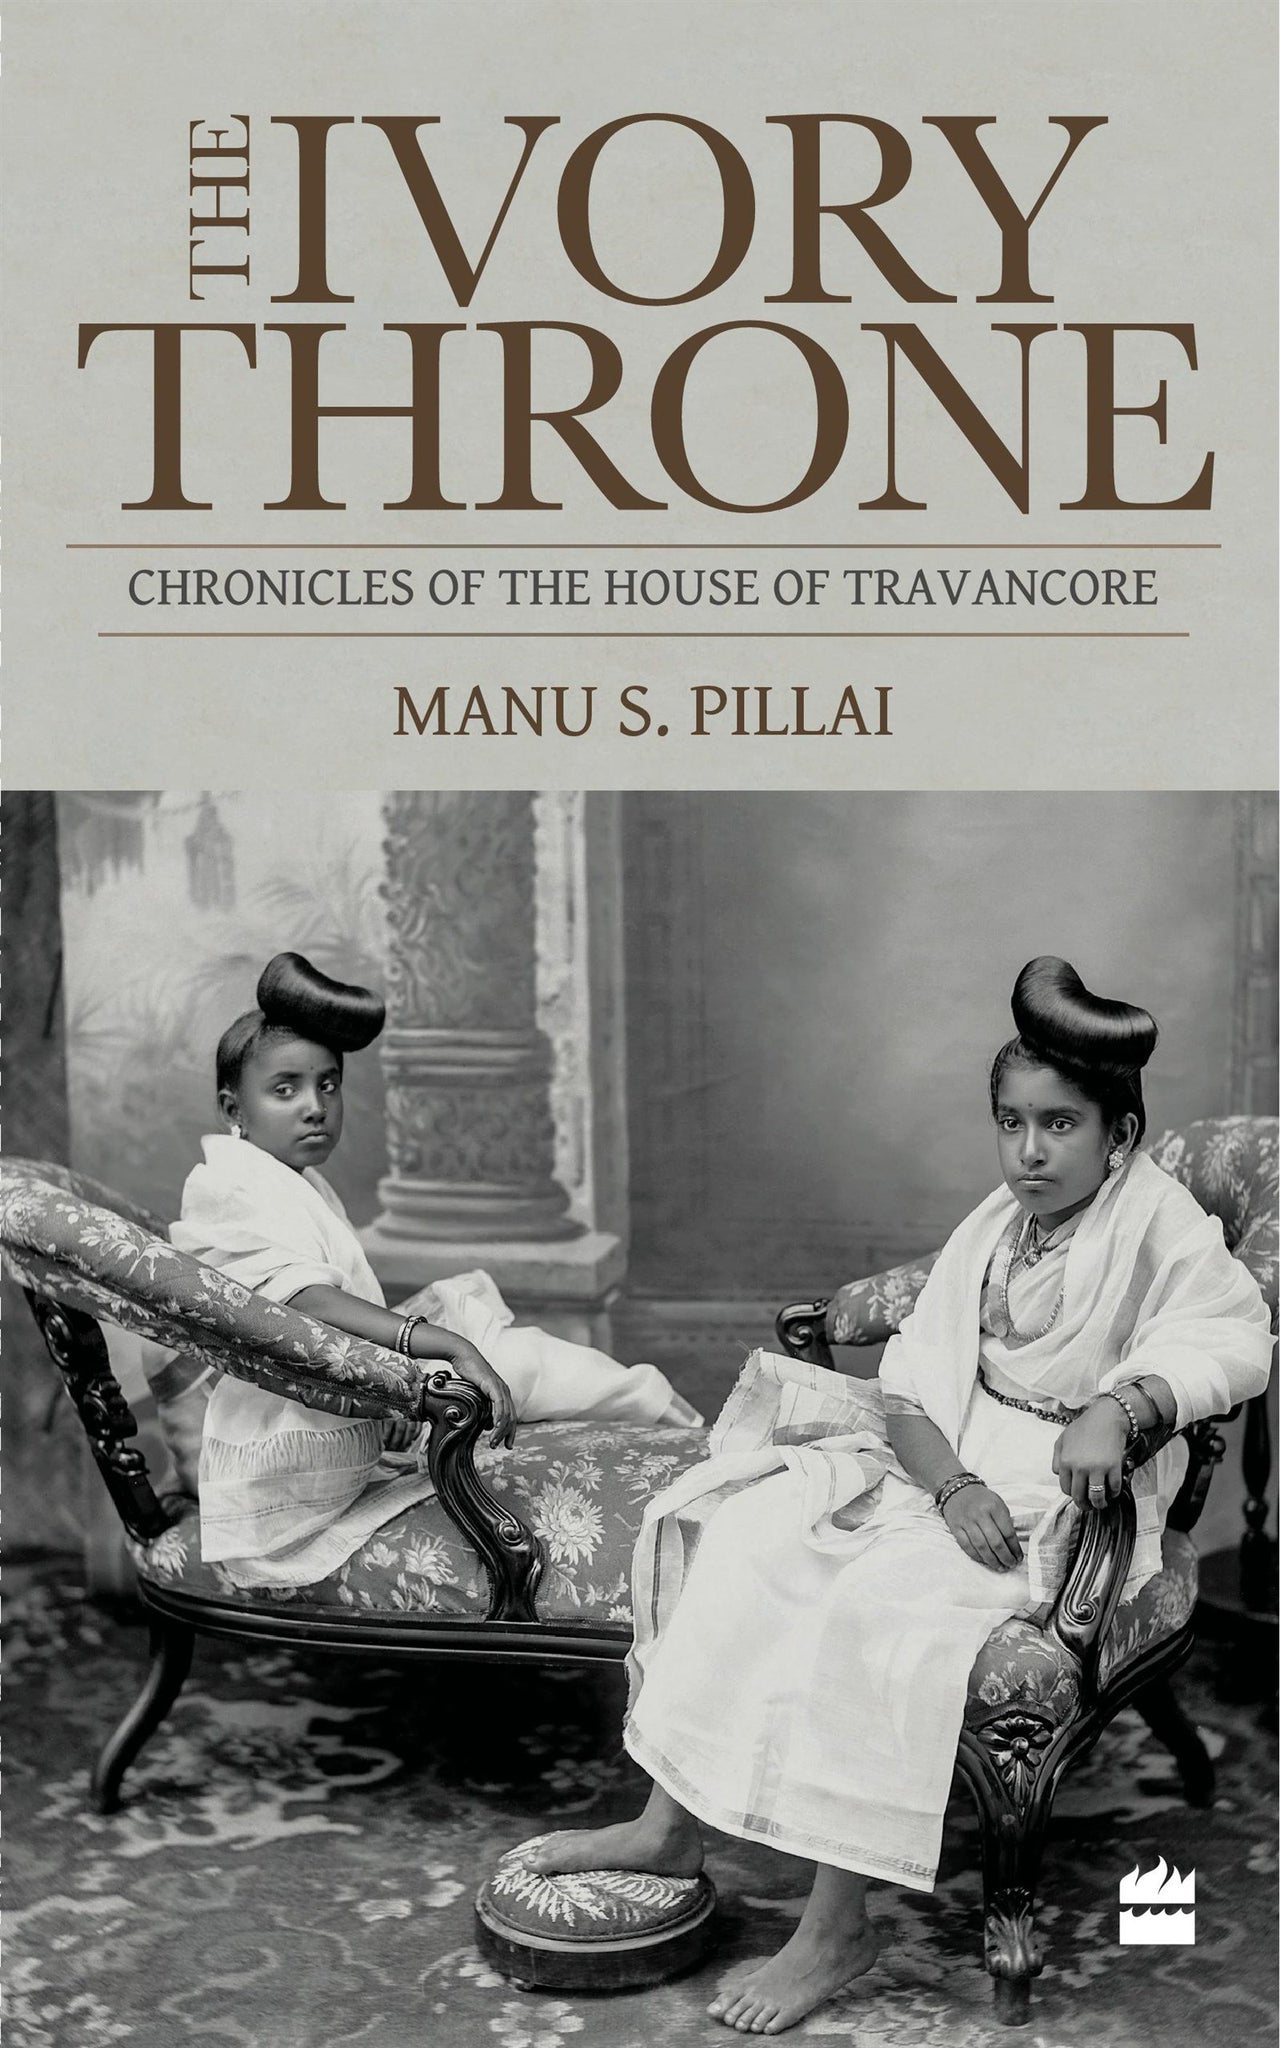 The Ivory Throne: Chronicles Of The House Of Travancore